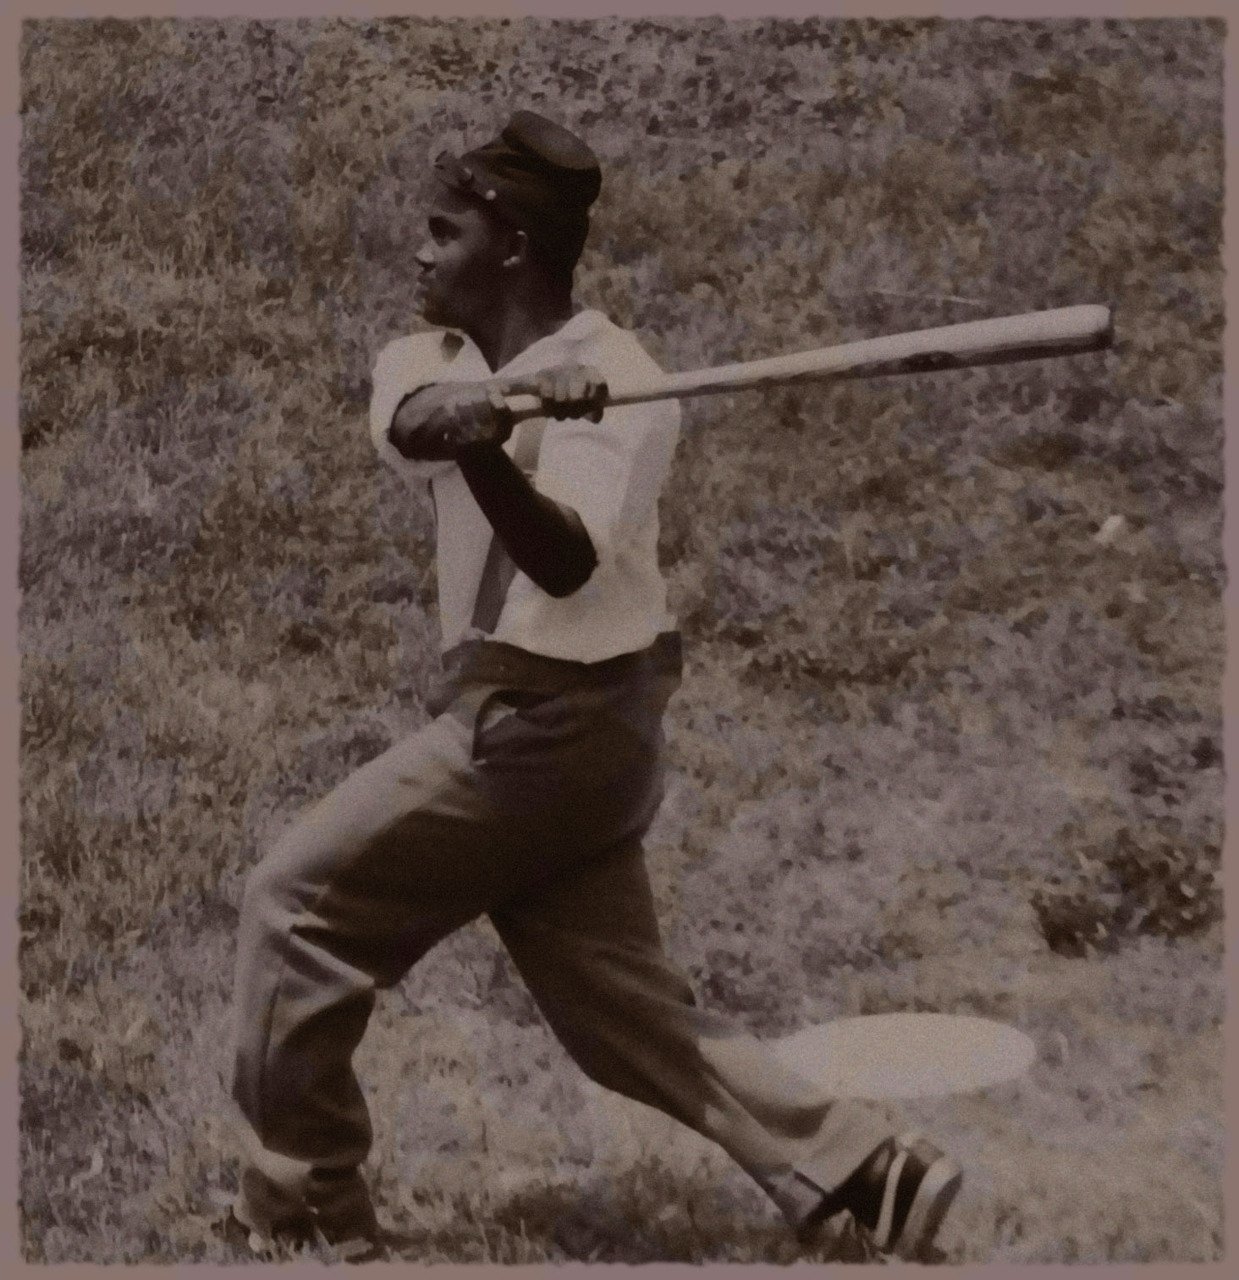 Batter during a baseball game at Fort Pulaski - the site of the first known photograph of a game of